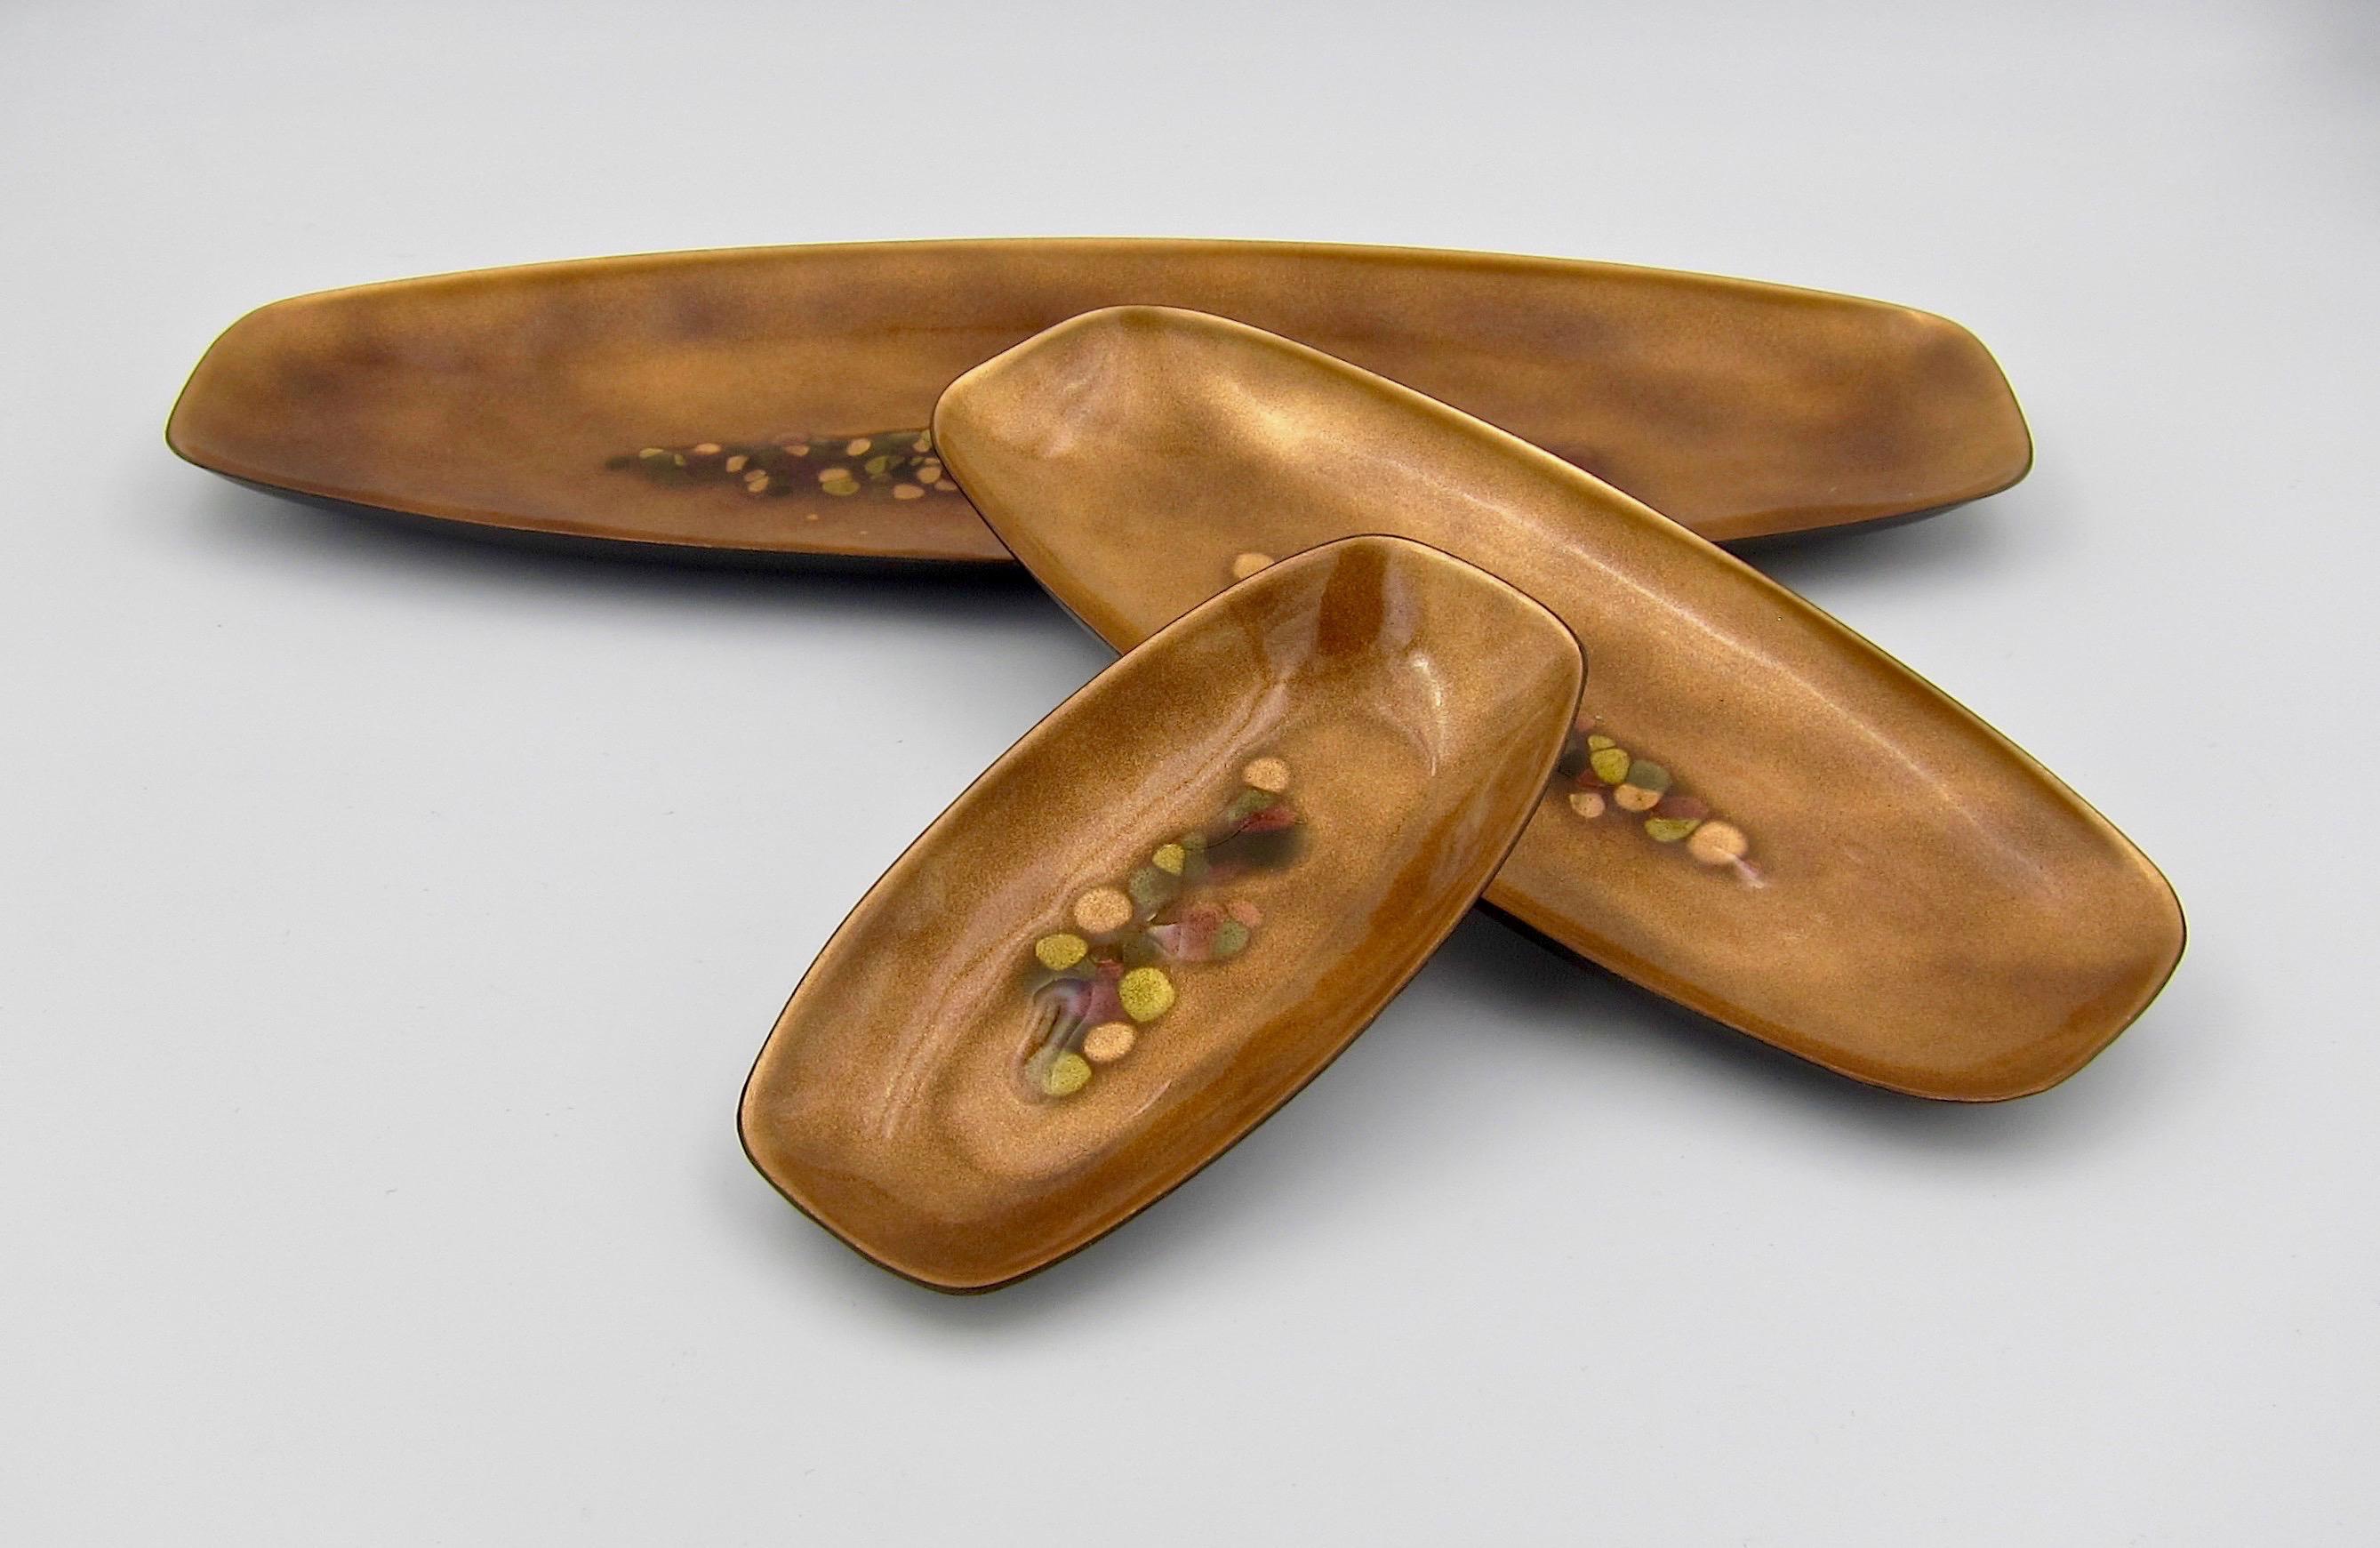 A matching set of three enameled copper trays of graduating size from Bovano of Cheshire, Connecticut dating circa 1970s. Each tray is decorated with a field of metallic golden brown enamel surrounding a raised abstract design of green, brown, and